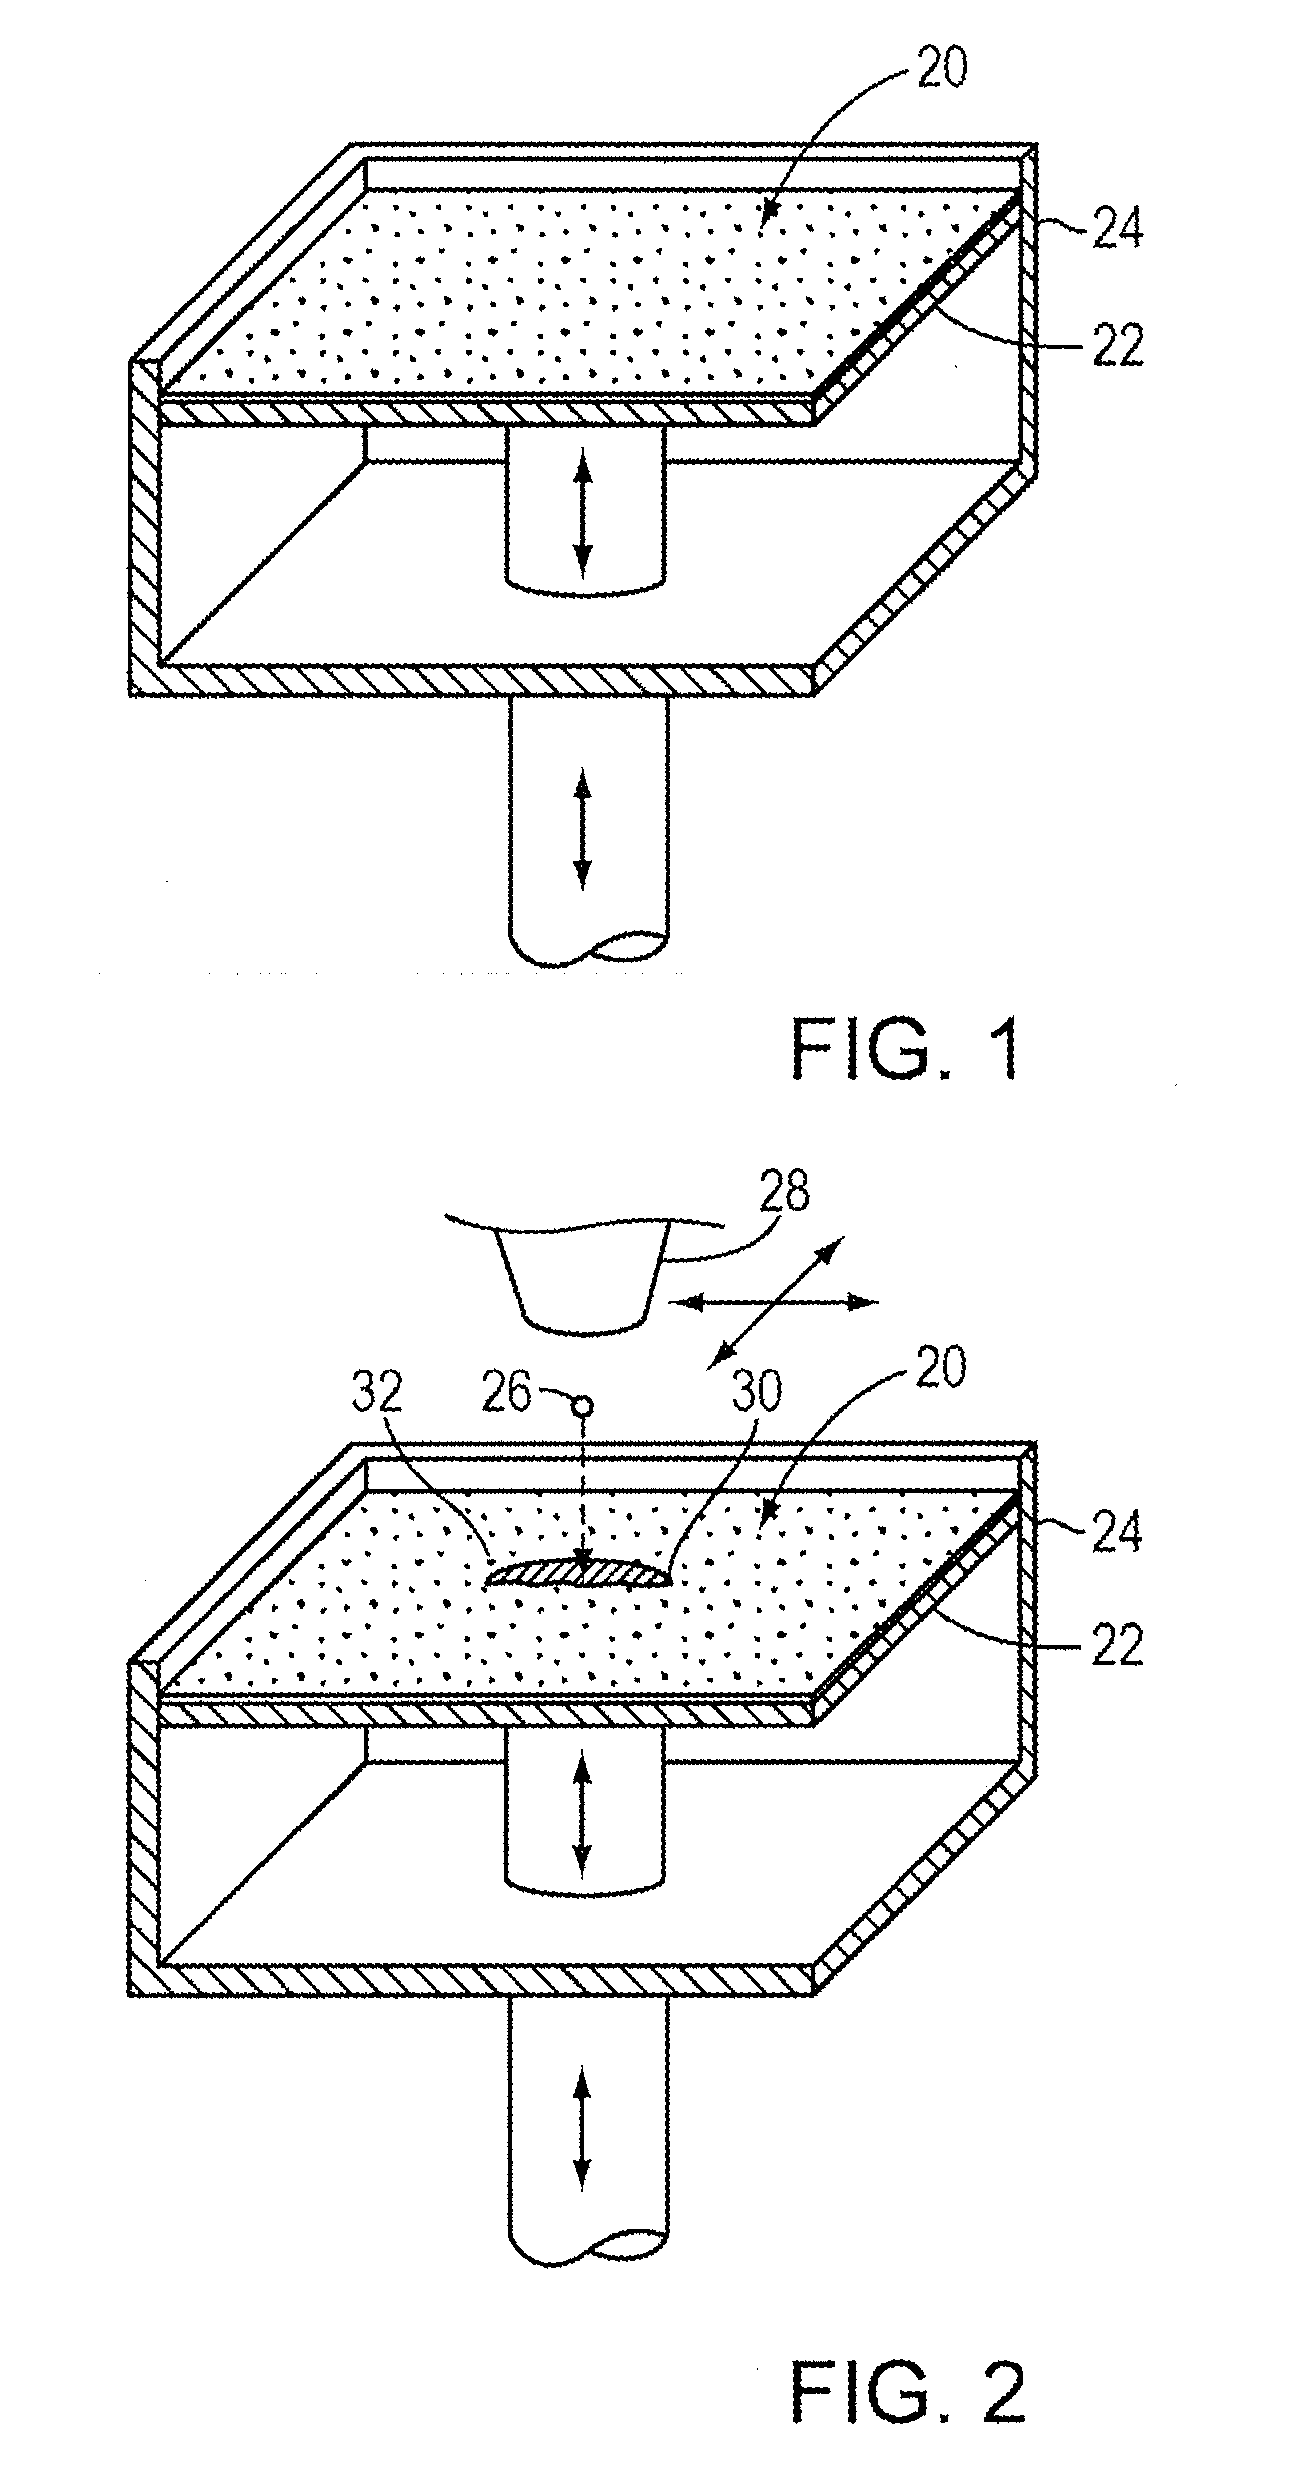 Three-dimensional printing material system with improved color, article performance, and ease of use